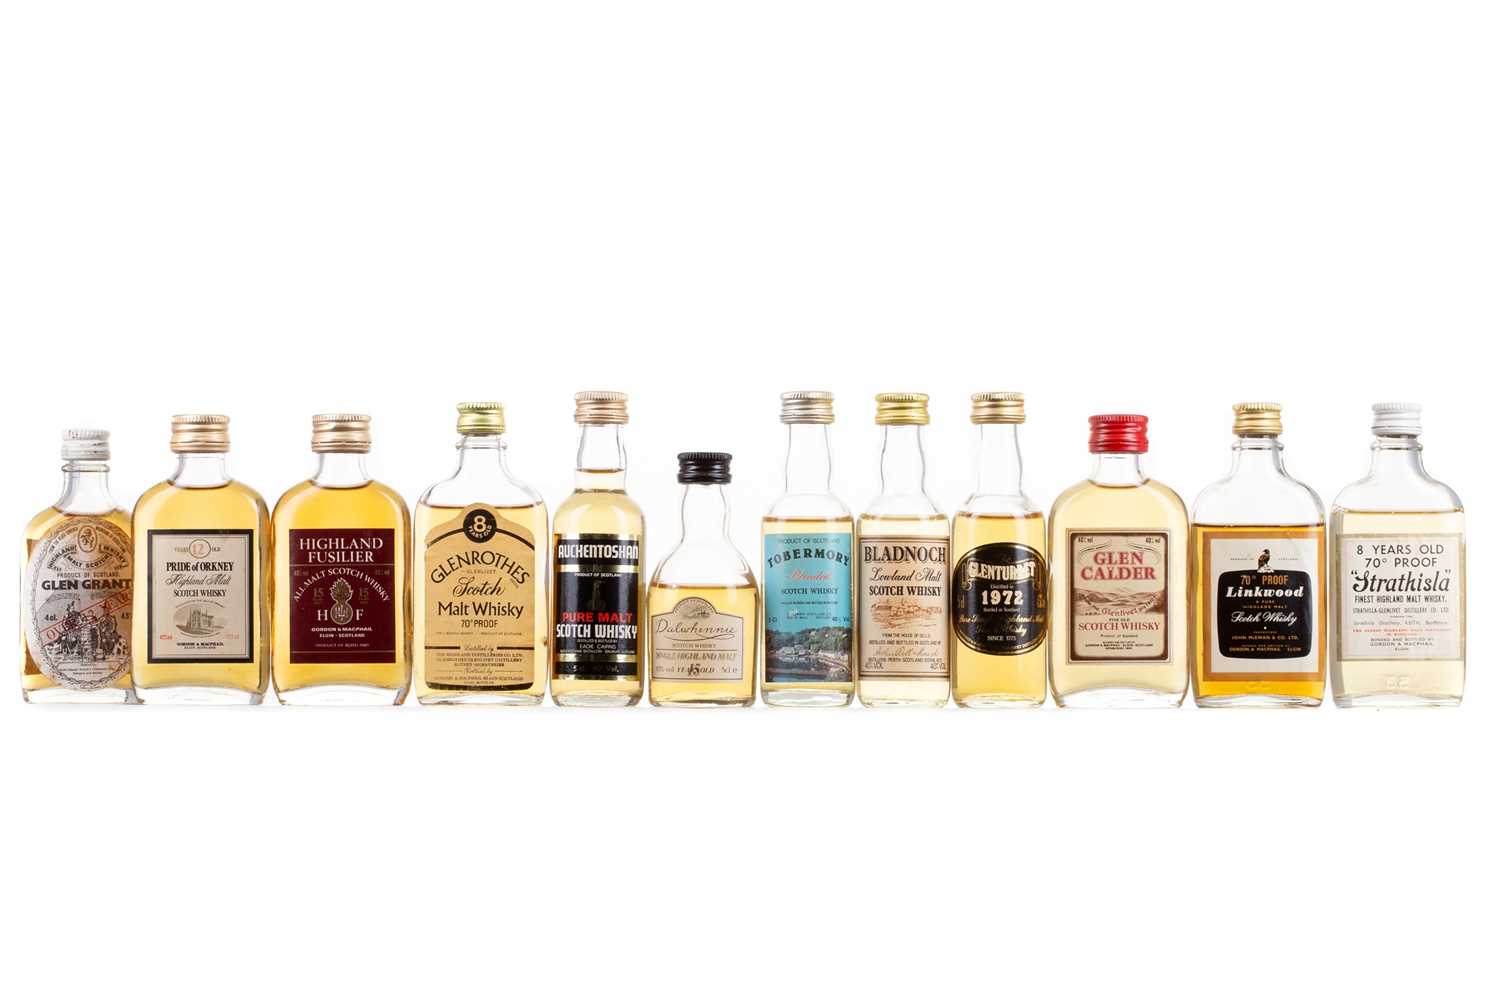 Lot 147 - 20 ASSORTED WHISKY MINIATURES - INCLUDING MORTLACH GORDON & MACPHAIL 70° PROOF